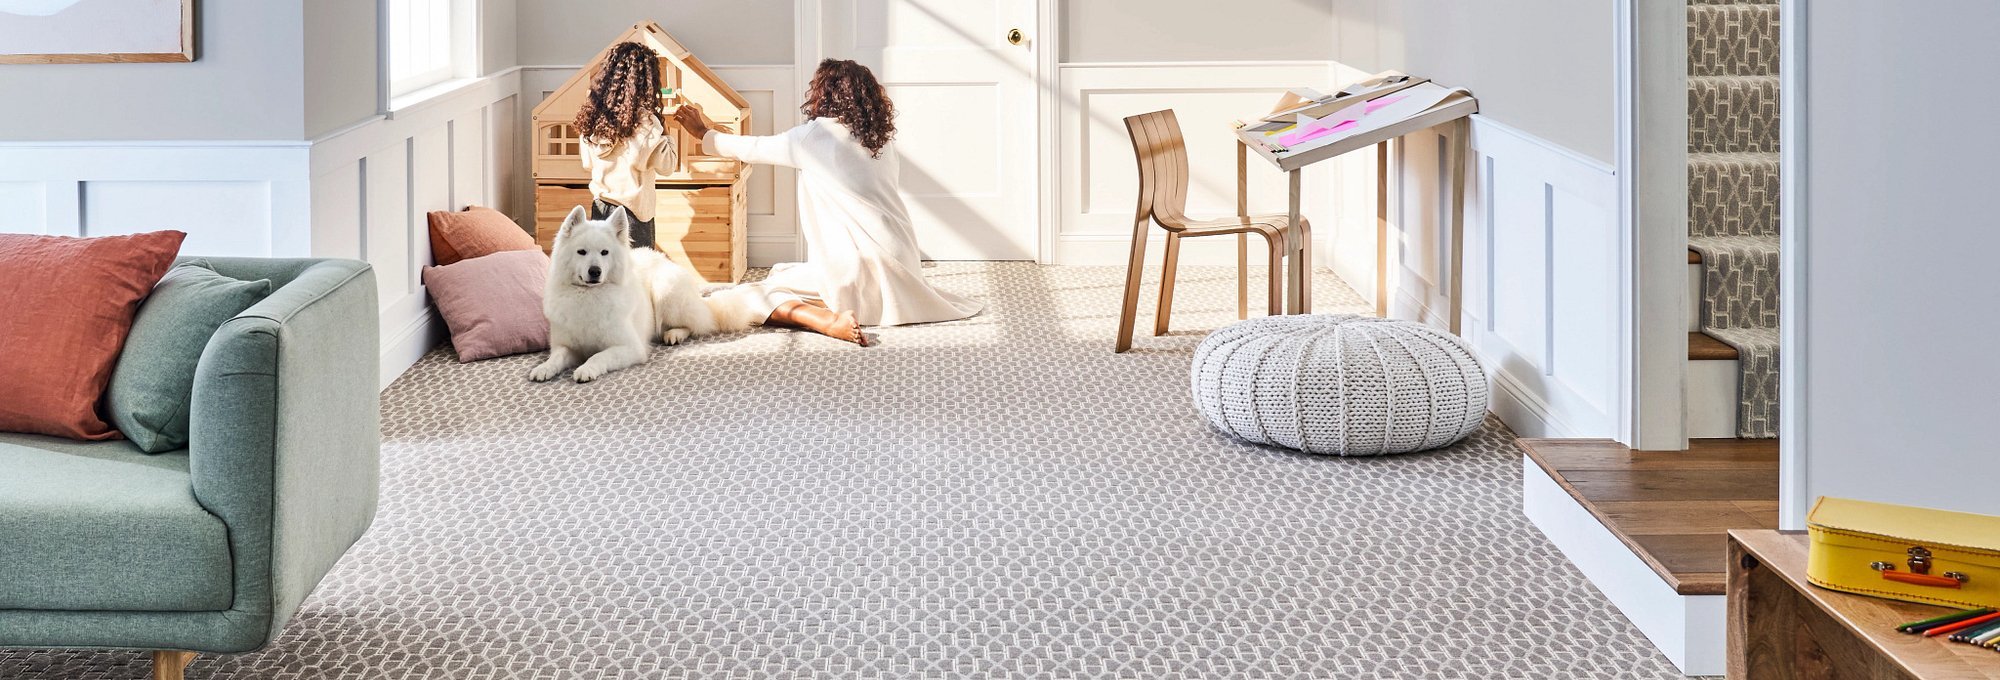 People and their dog playing in a living room with gray patterned carpet from Success Floor Covering LLC in Oakland, MD